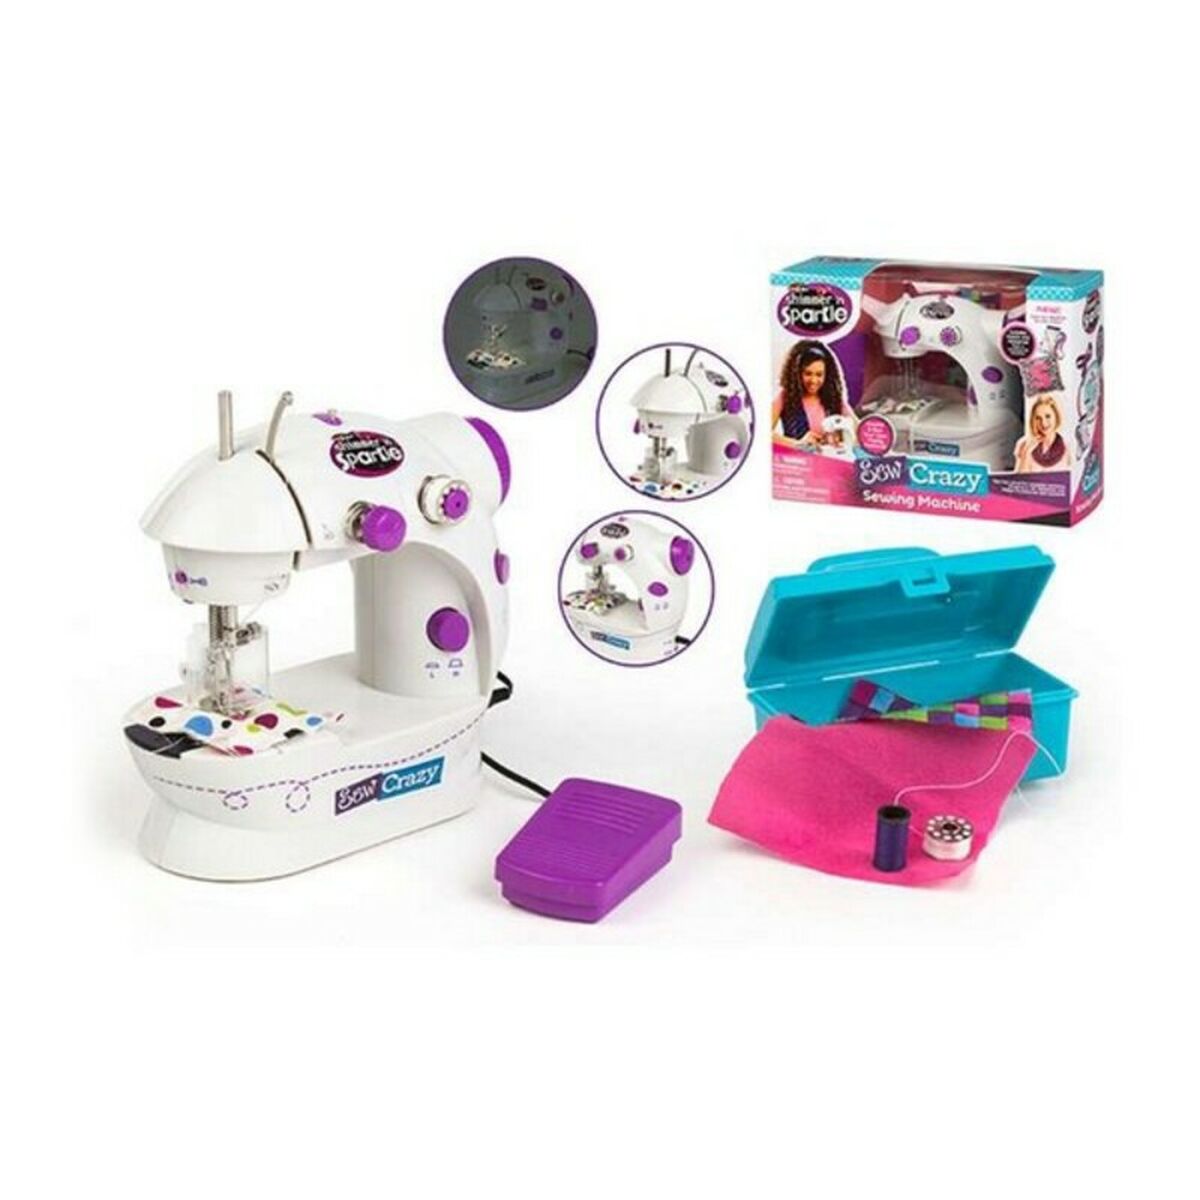 Toy sewing machine Shimmer N Sparkle Colorbaby 44080 - Little Baby Shop